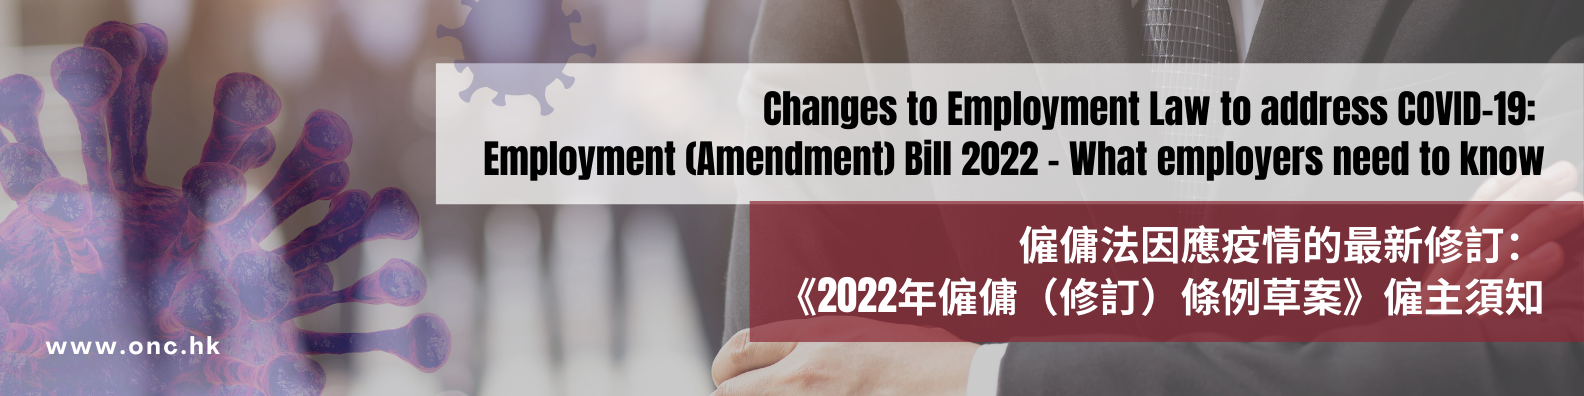 Changes to Employment Law to address COVID-19: Employment (Amendment) Bill 2022 – What employers need to know